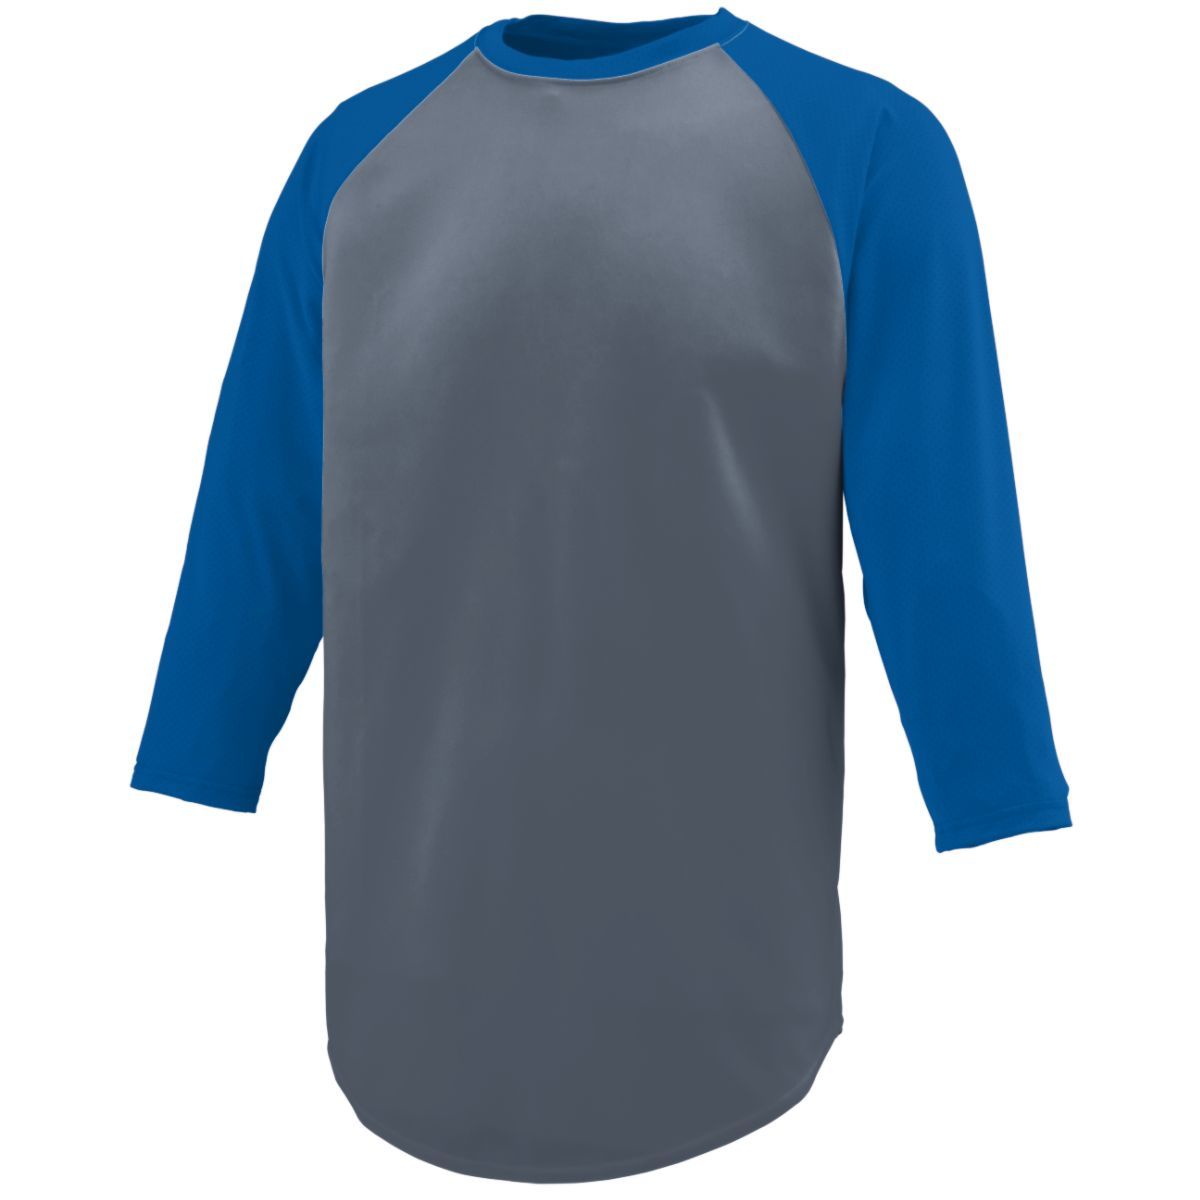 Augusta Sportswear Nova Jersey in Graphite/Royal  -Part of the Adult, Adult-Jersey, Augusta-Products, Baseball, Shirts, All-Sports, All-Sports-1 product lines at KanaleyCreations.com